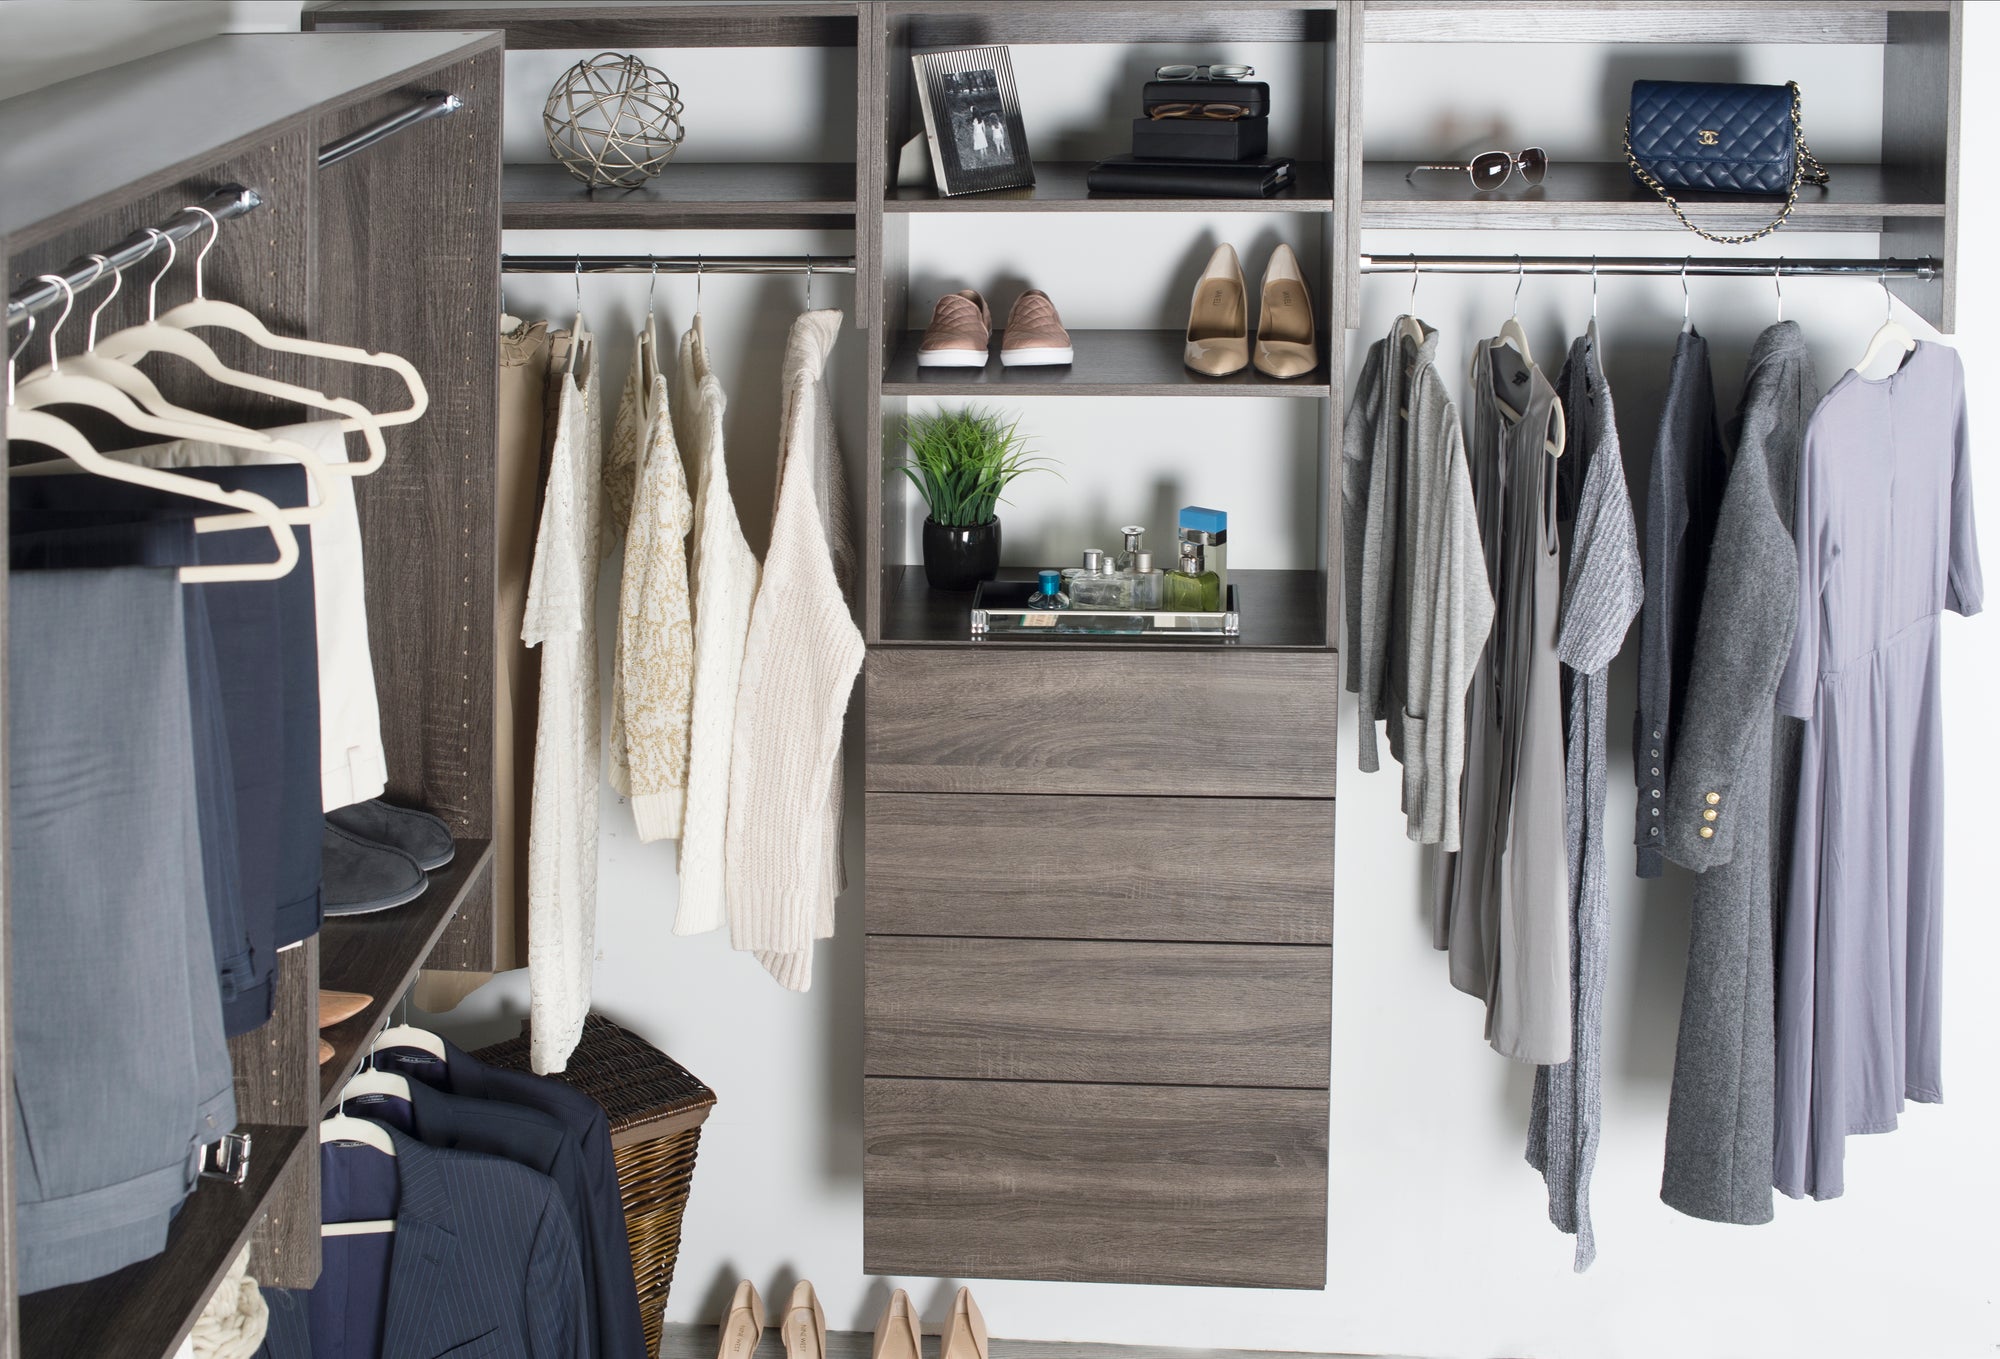 5 Quick and Easy Home Organization Tips You Can Do This Weekend